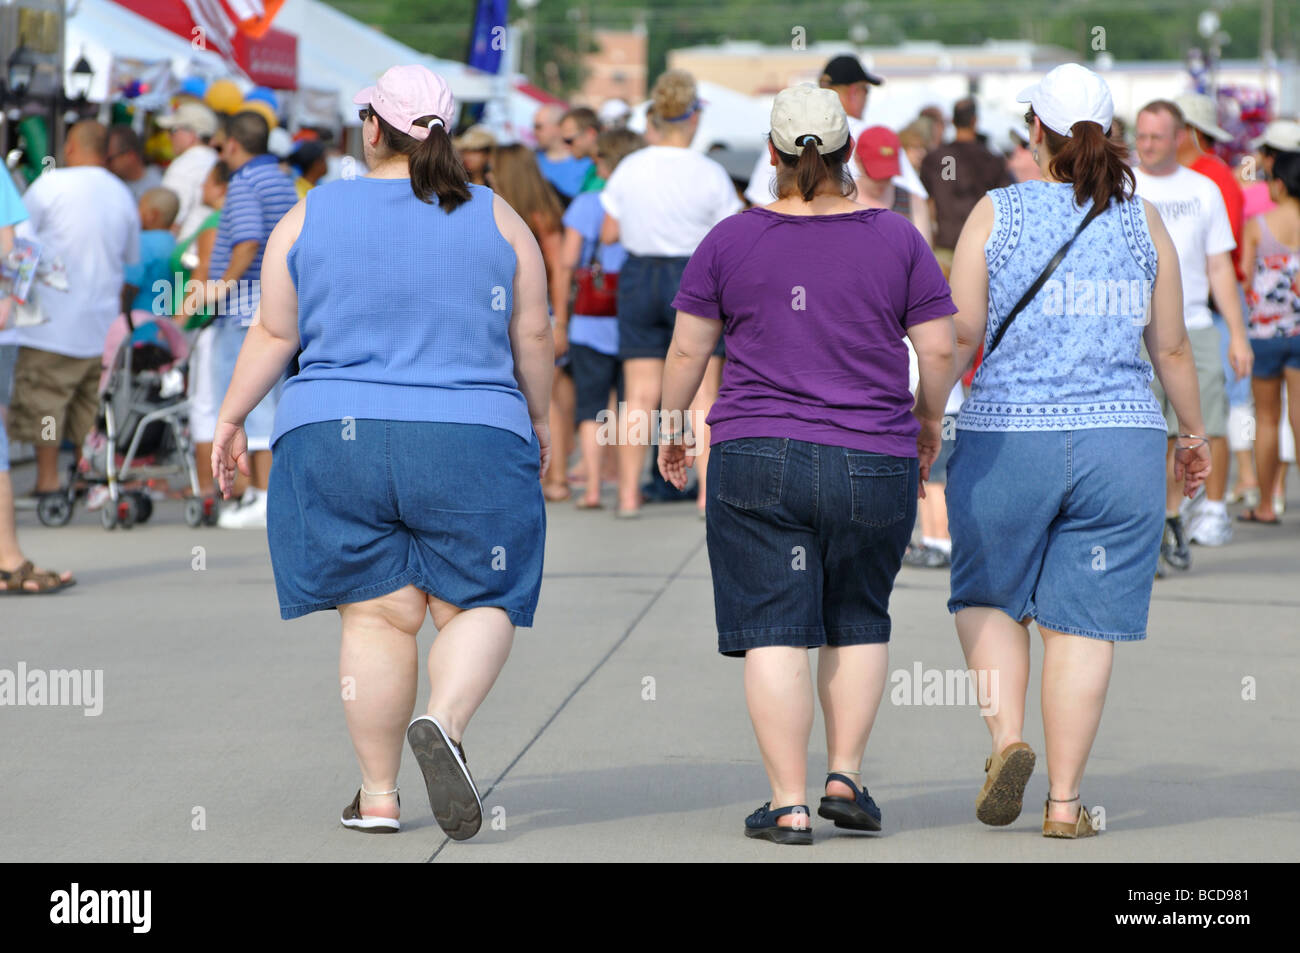 Obese people Stock Photo